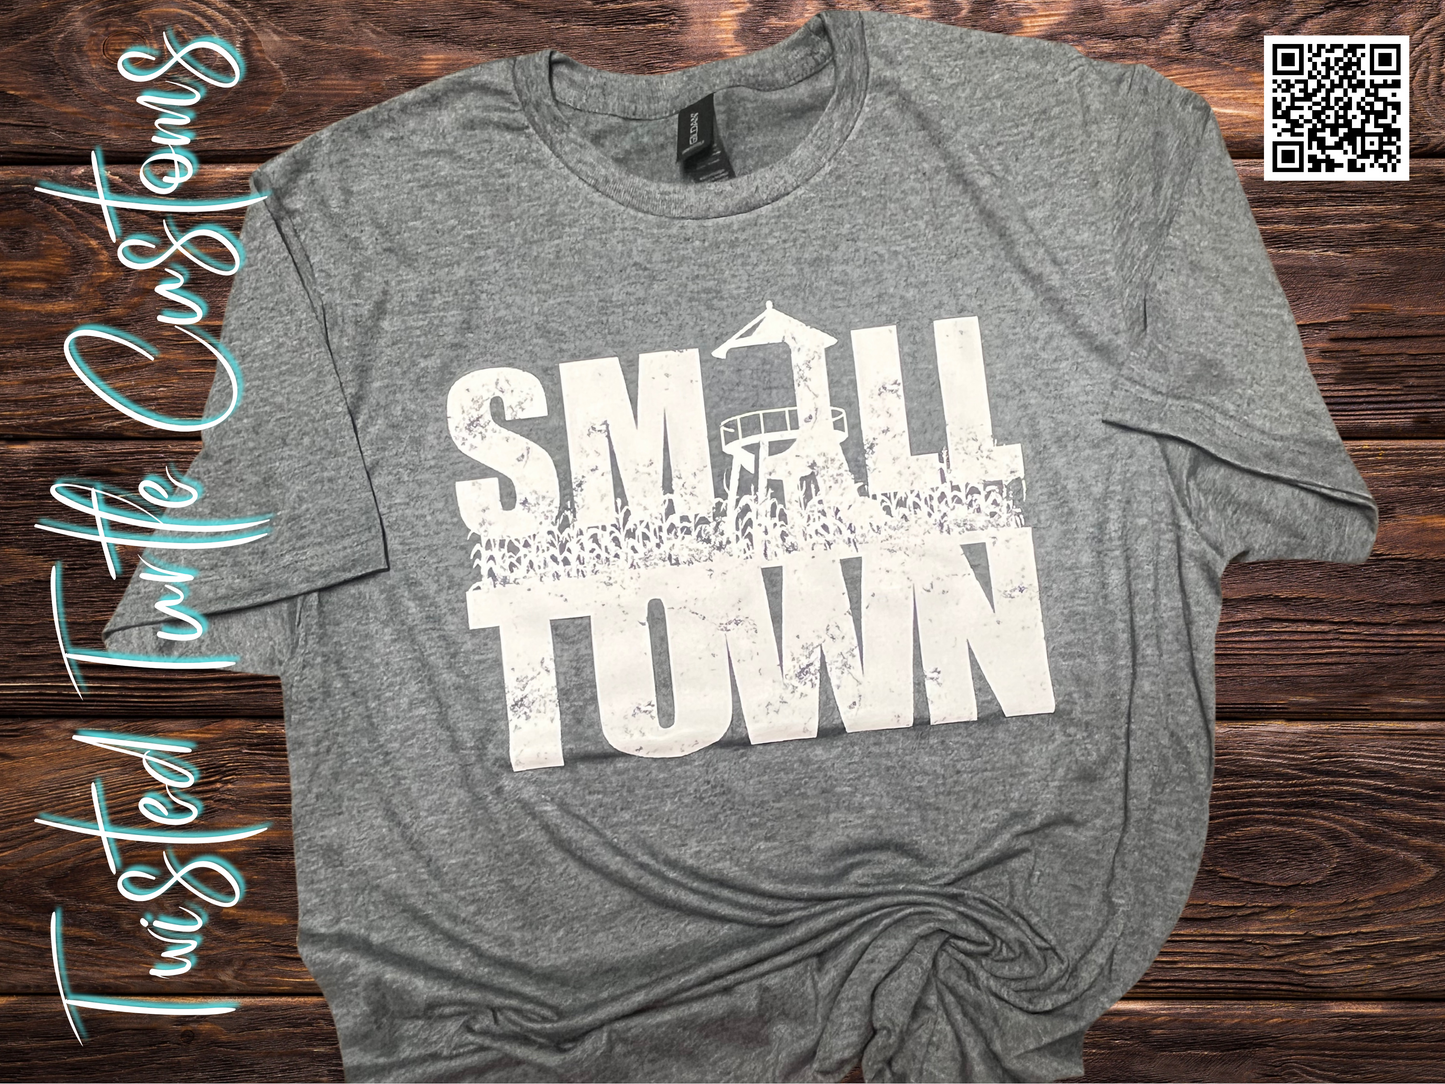 Small Town Screen Print Water Tower Tee